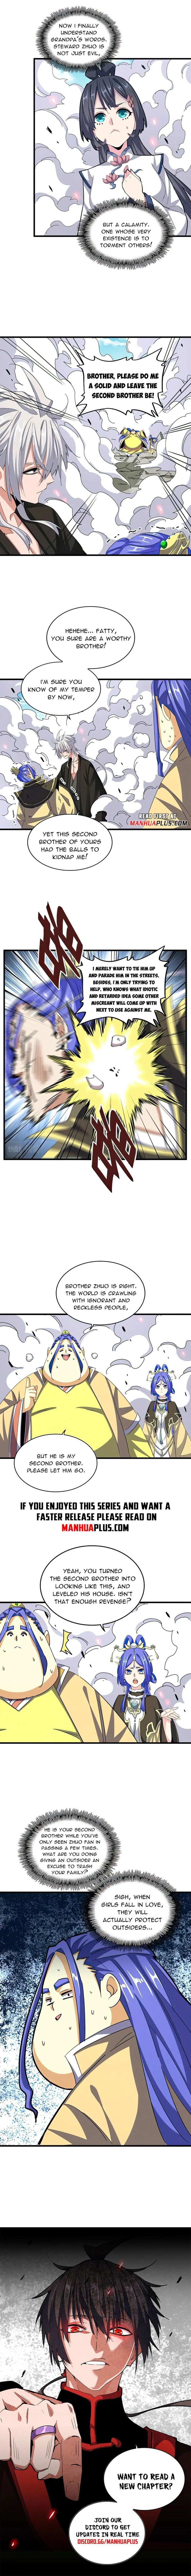 Magic Emperor Chapter 399 page 7